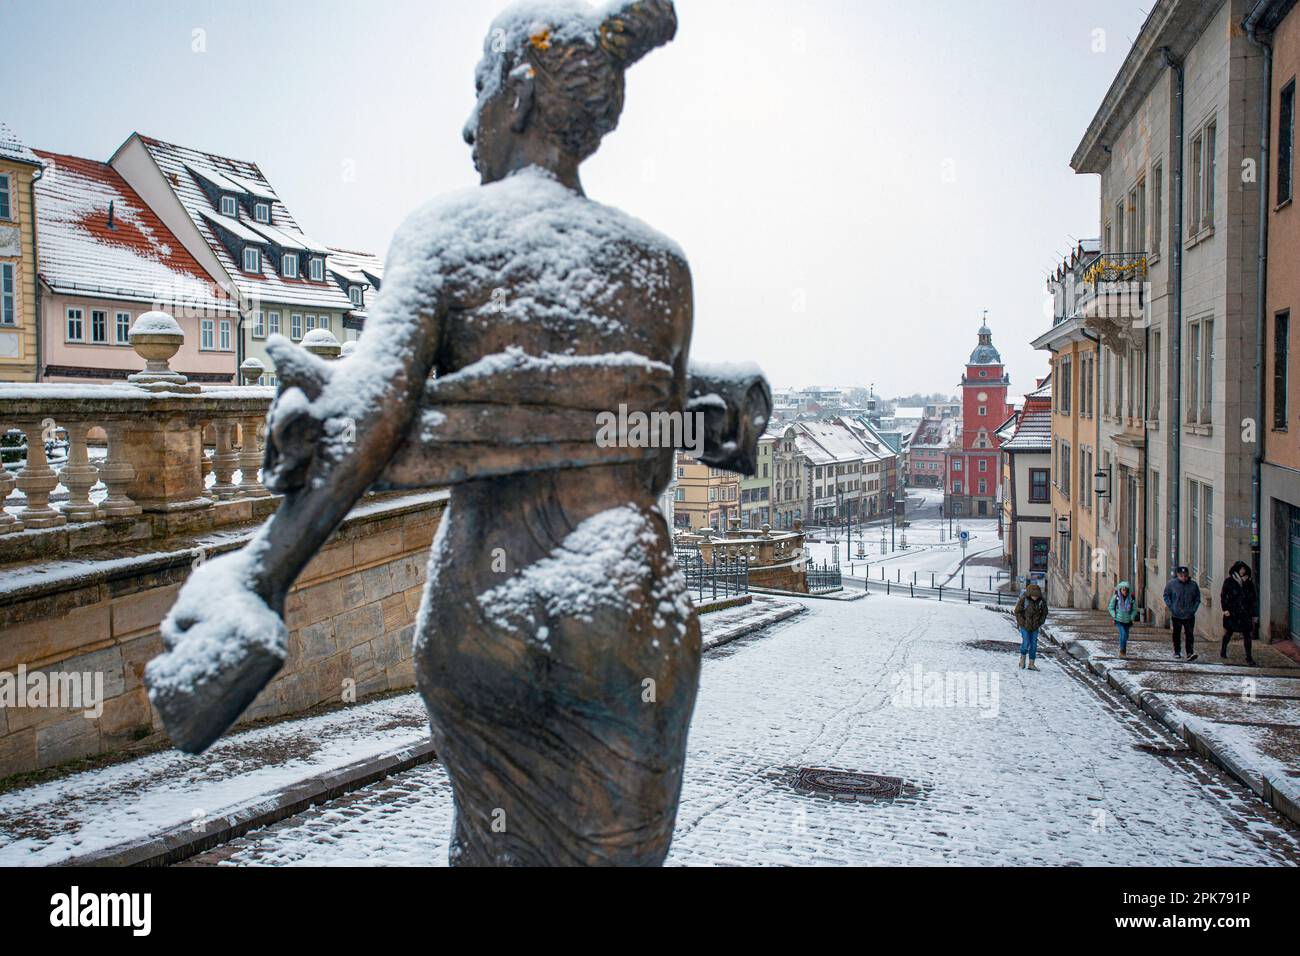 Townscape of Gotha in Thuringia, Germany. Stock Photo